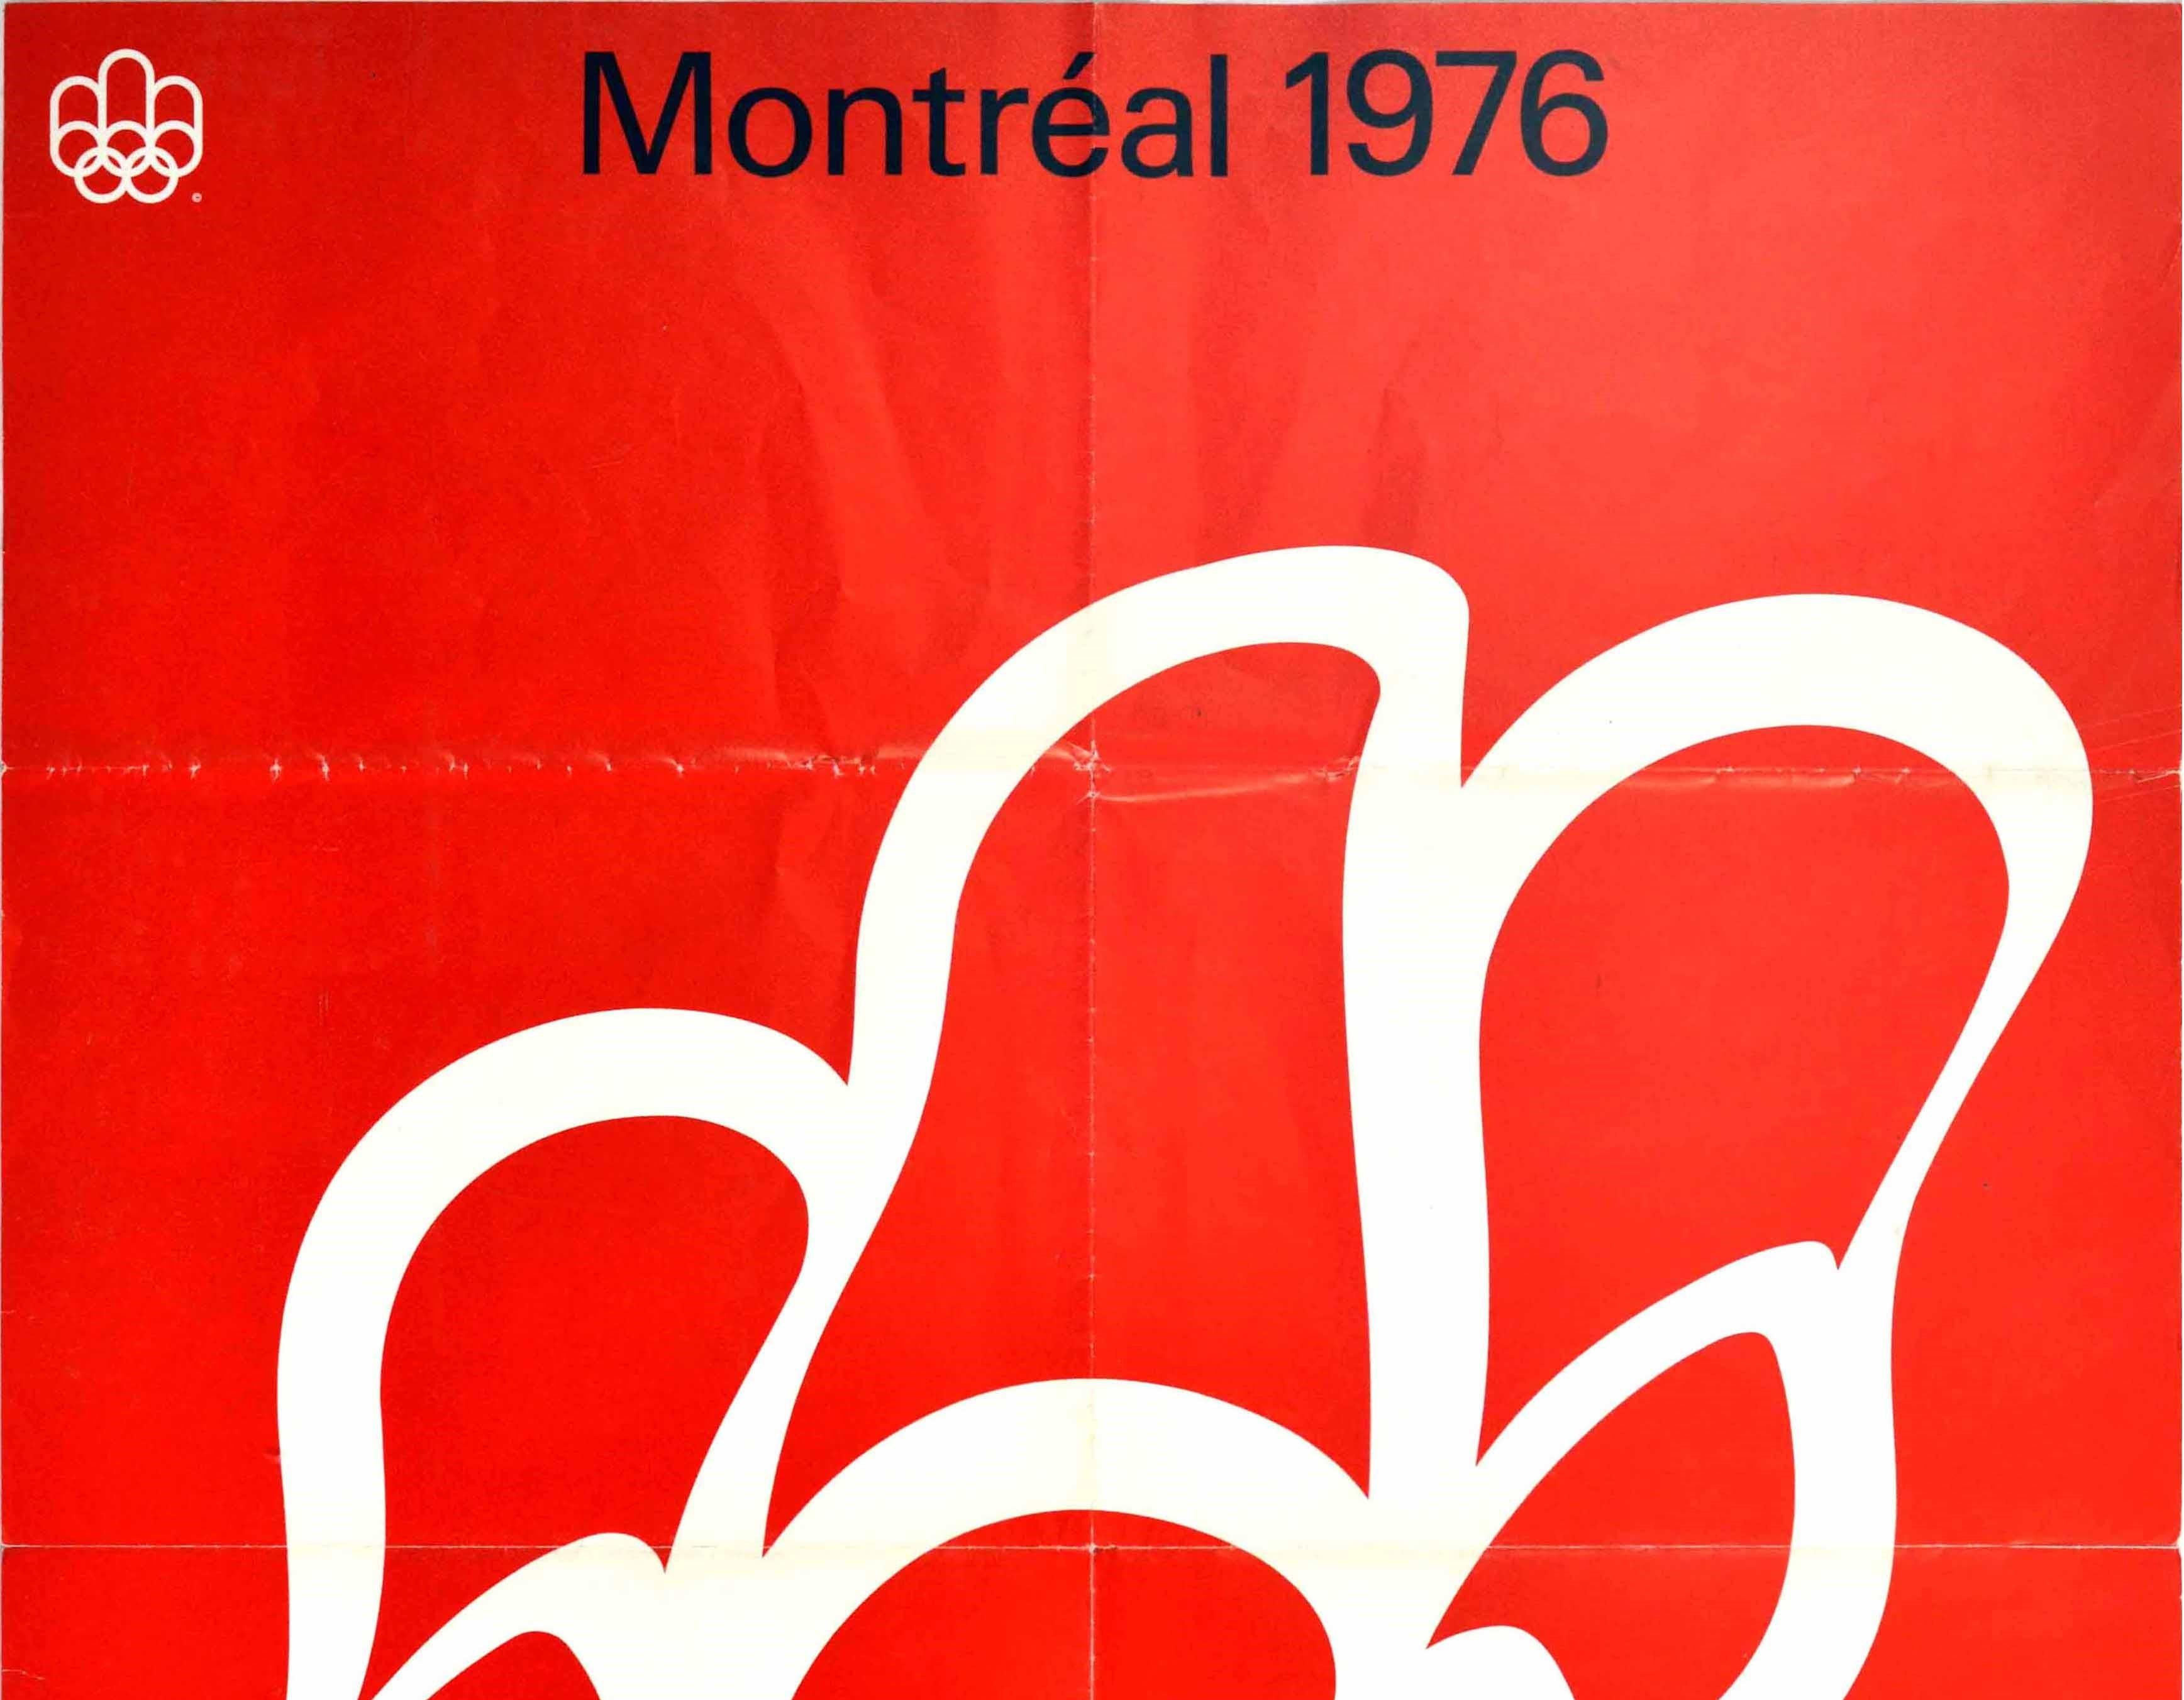 Original vintage sport advertising poster for the Summer Olympic Games 1976 held in Montreal featuring the read and white colours of the Canadian flag with the Olympic rings in white floating on a red background and the bold black letters above with